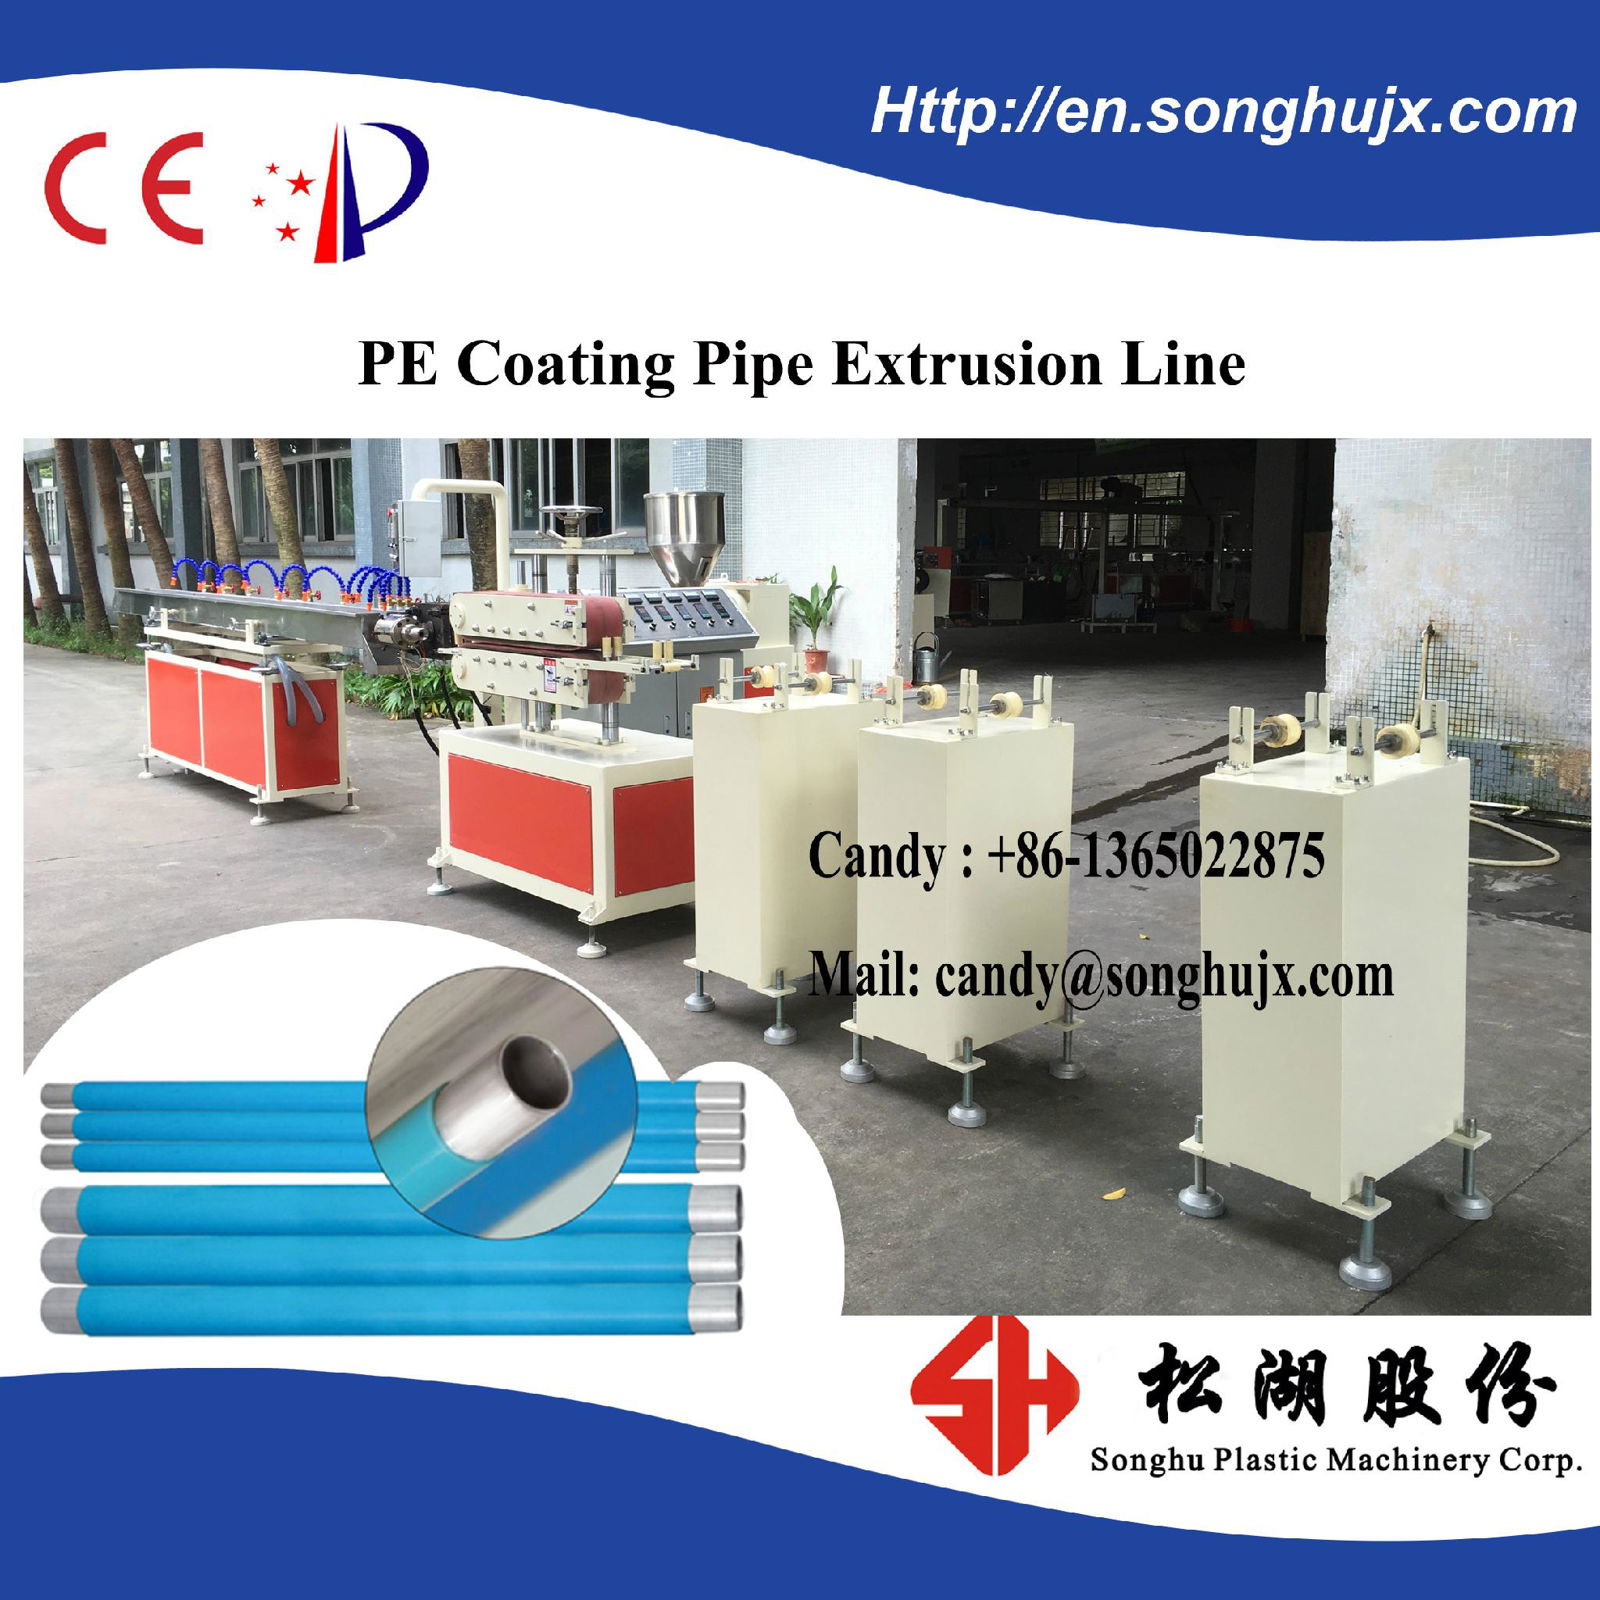 New Condition PE Coated Pipe Extruder For Metal Tube Coating